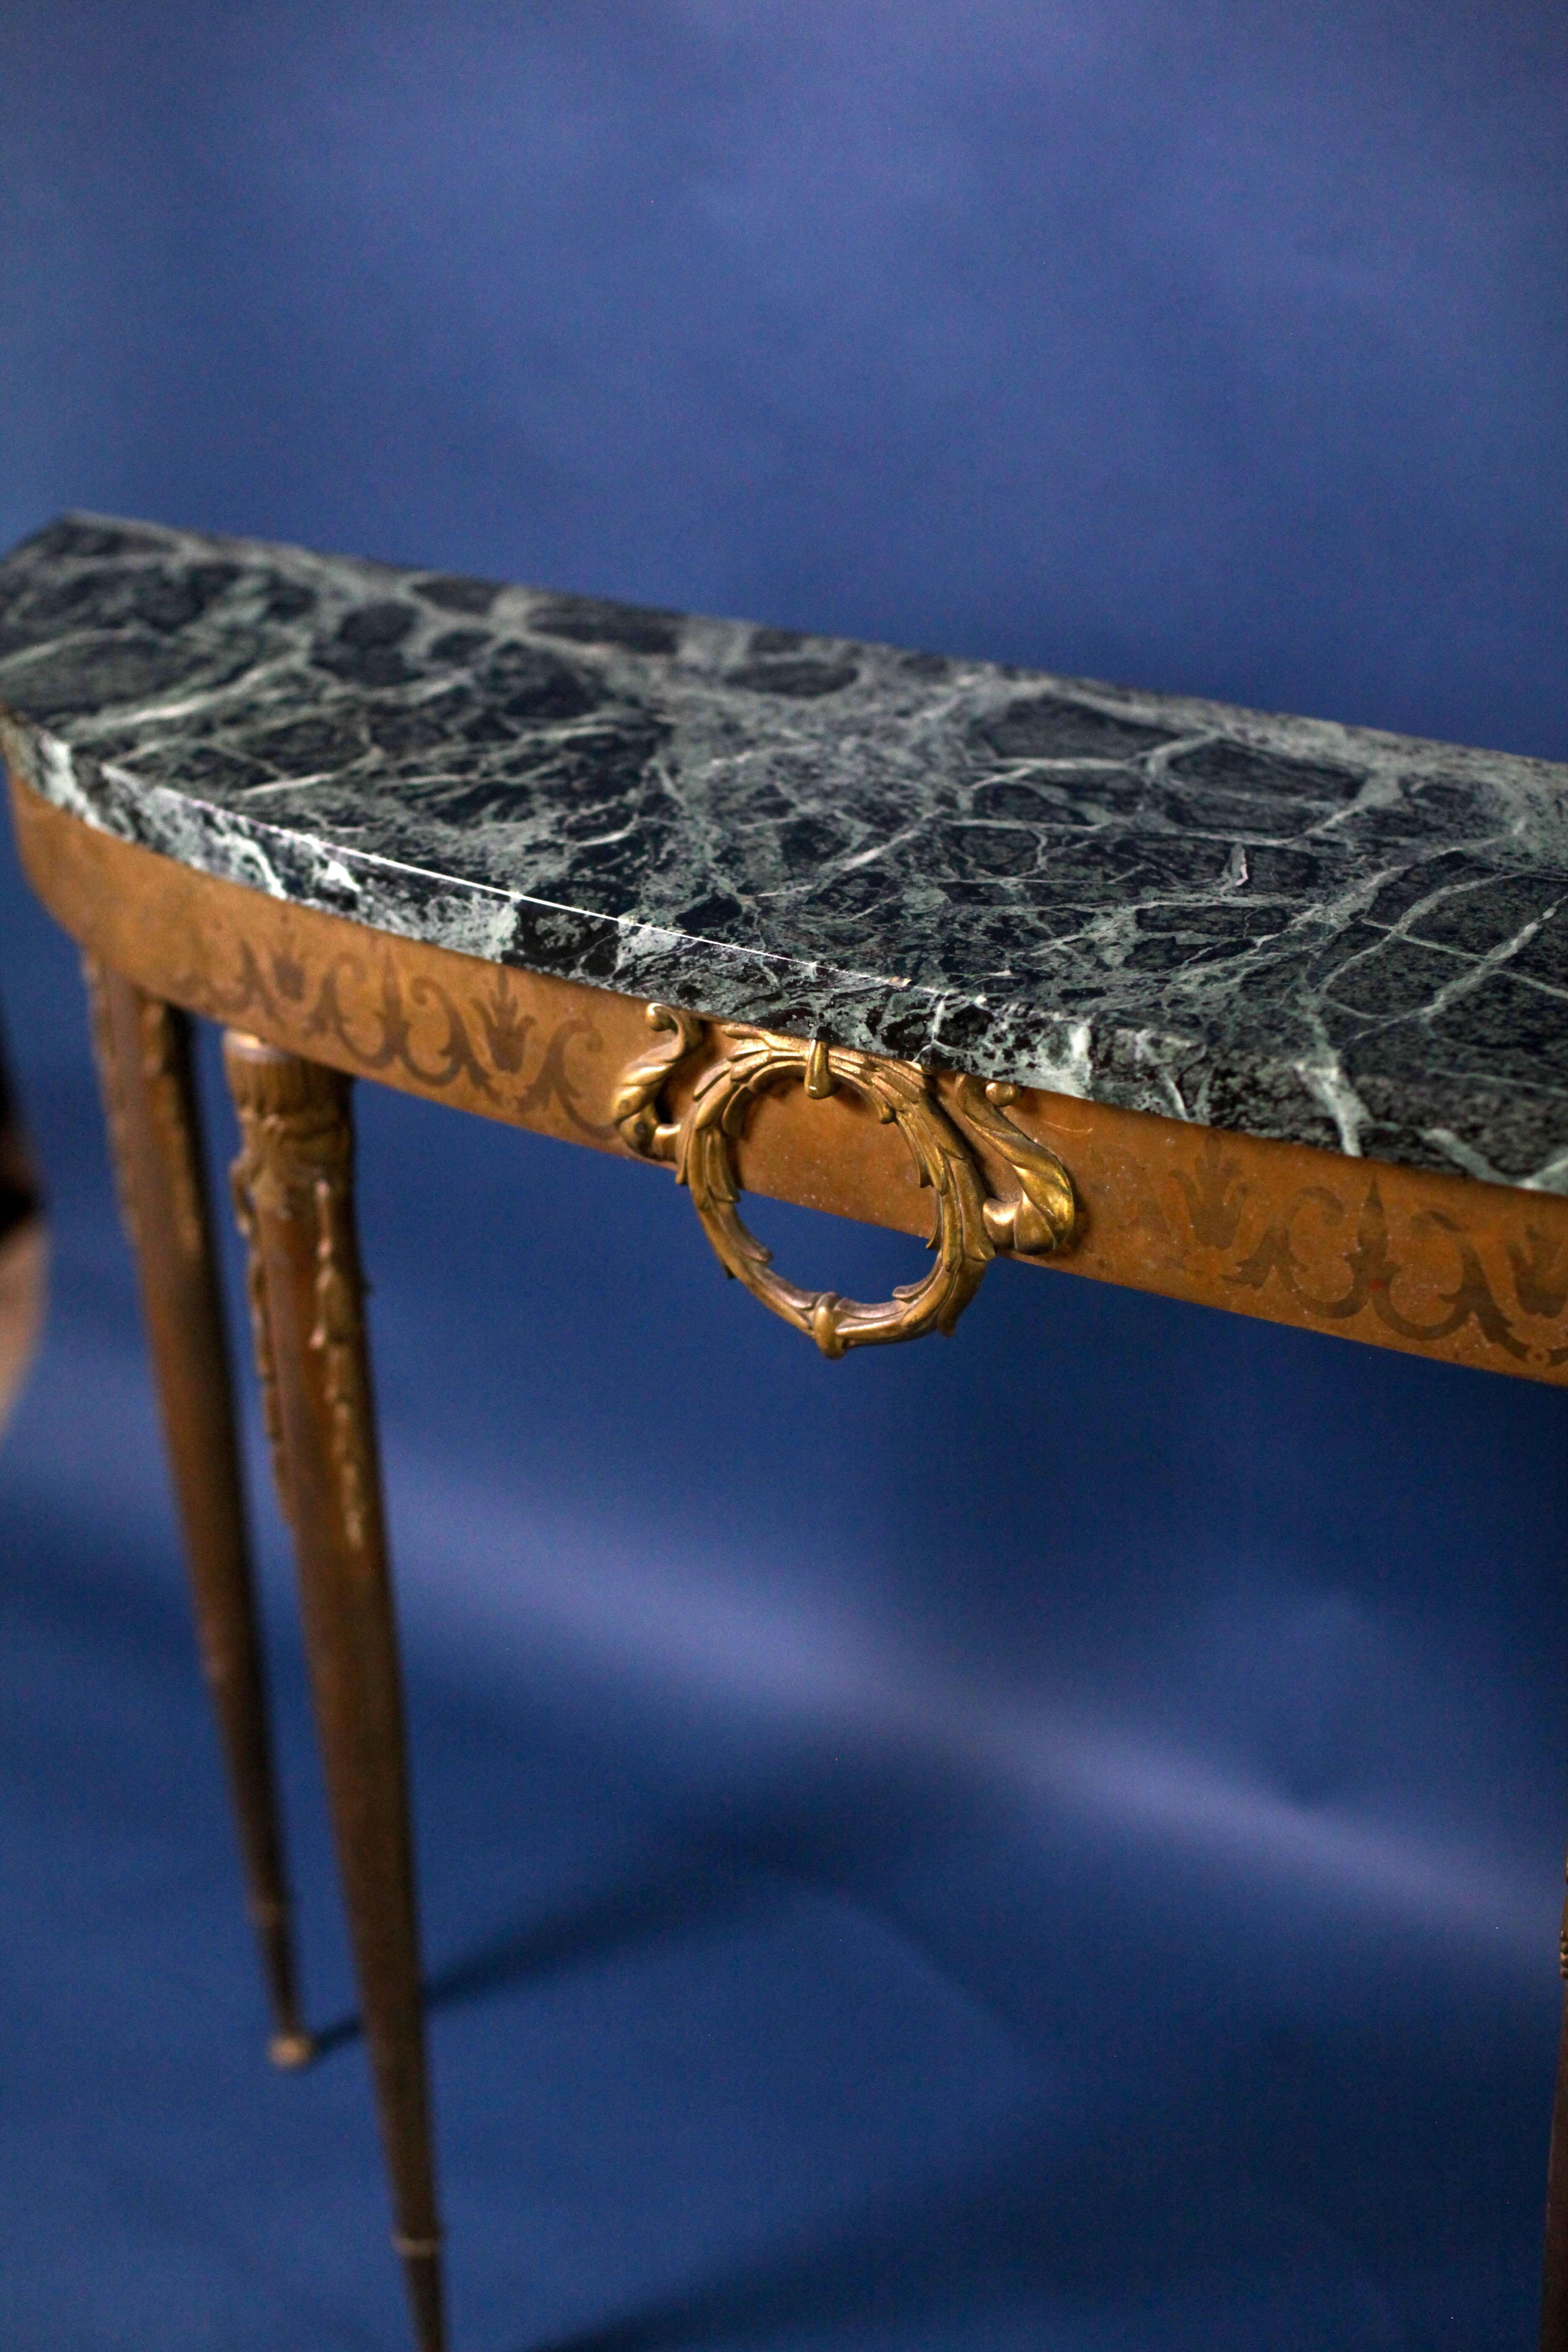 This stunning example of late neoclassical furniture will bring a touch of grace and elegance to any interior. At only 11